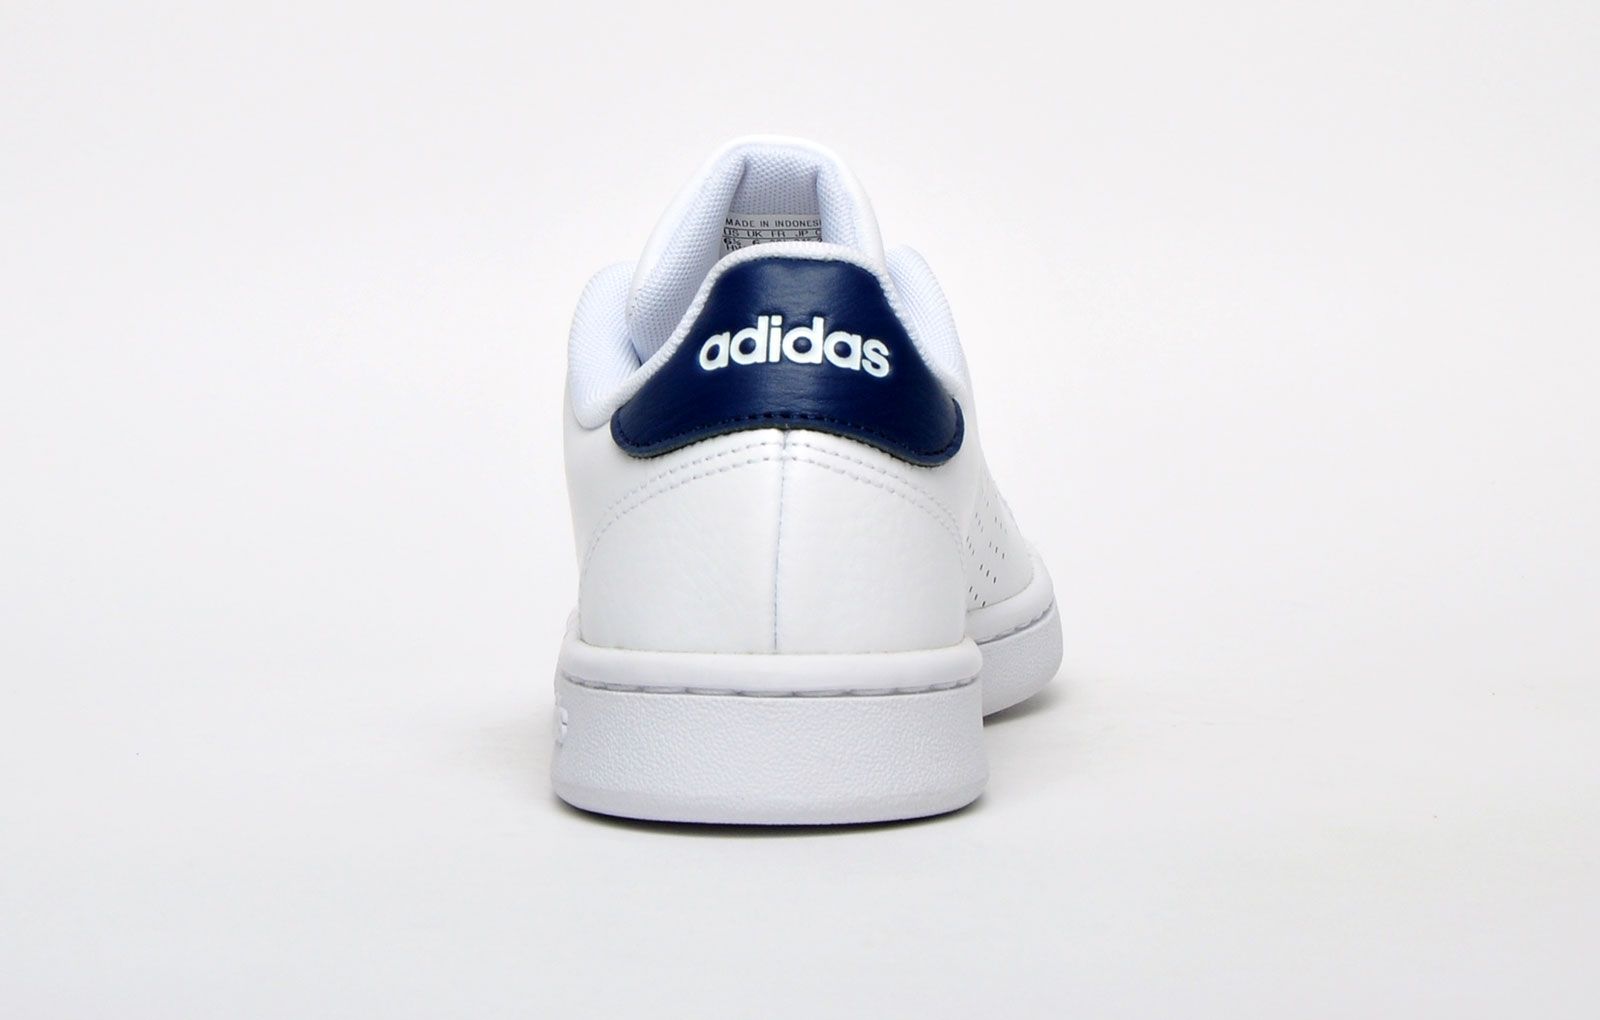 Step out in unbeatable Adidas style with this new in Adidas Advantage lifestyle trainer. These Adidas trainers have a vintage styled throwback court look with improved modern comfort. Designed in an on-trend crisp clean white colourway and detailed with perforated 3-stripes to the side for a luxe designer led finish. The contrasting navy trims show of the visual aesthetics of this classic trainer while the padded heel and ankle collar, plus the super comfy cloudfoam comfort insole moulds the trainer to your foot for superior step in comfort throughout your daily wear.
 - Leather / synthetic upper 
 - Secure up front lace fastening 
 - Cloudfoam cushioned insole offers comfort 
 - Textured vintage styled sole unit
 - Adidas branding throughout
Please Note: 
These Adidas trainers are sold as B grades which means there may be some very slight cosmetic issues on the shoe and they come in a white Adidas box with on most occasions the Adidas brand authenticity details attached to them. There could occasional be issues with wrong swing tags being allocated to wrong shoes by Adidas themselves which could result in some size confusion but you must take the size IN THE SHOE as the size that the shoe actually is ( not what is on the tag ). We have checked most of the shoes and in our opinion, all are practically perfect without any blemishes on them at all and in essence if the shoes did not have the letter B denoted on the swing tag you would presume these were perfect shoes. All shoes are guaranteed against fair wear and tear and offer a substantial saving against the normal high street price. The overall function or performance of the shoe will not be affected by any minor cosmetic issues. B Grades are original authentic products released by the brand manufacturer with their approval at greatly reduced prices. If you are unhappy with your purchase, we will be more than happy to take the shoes back from you and issue a full refund